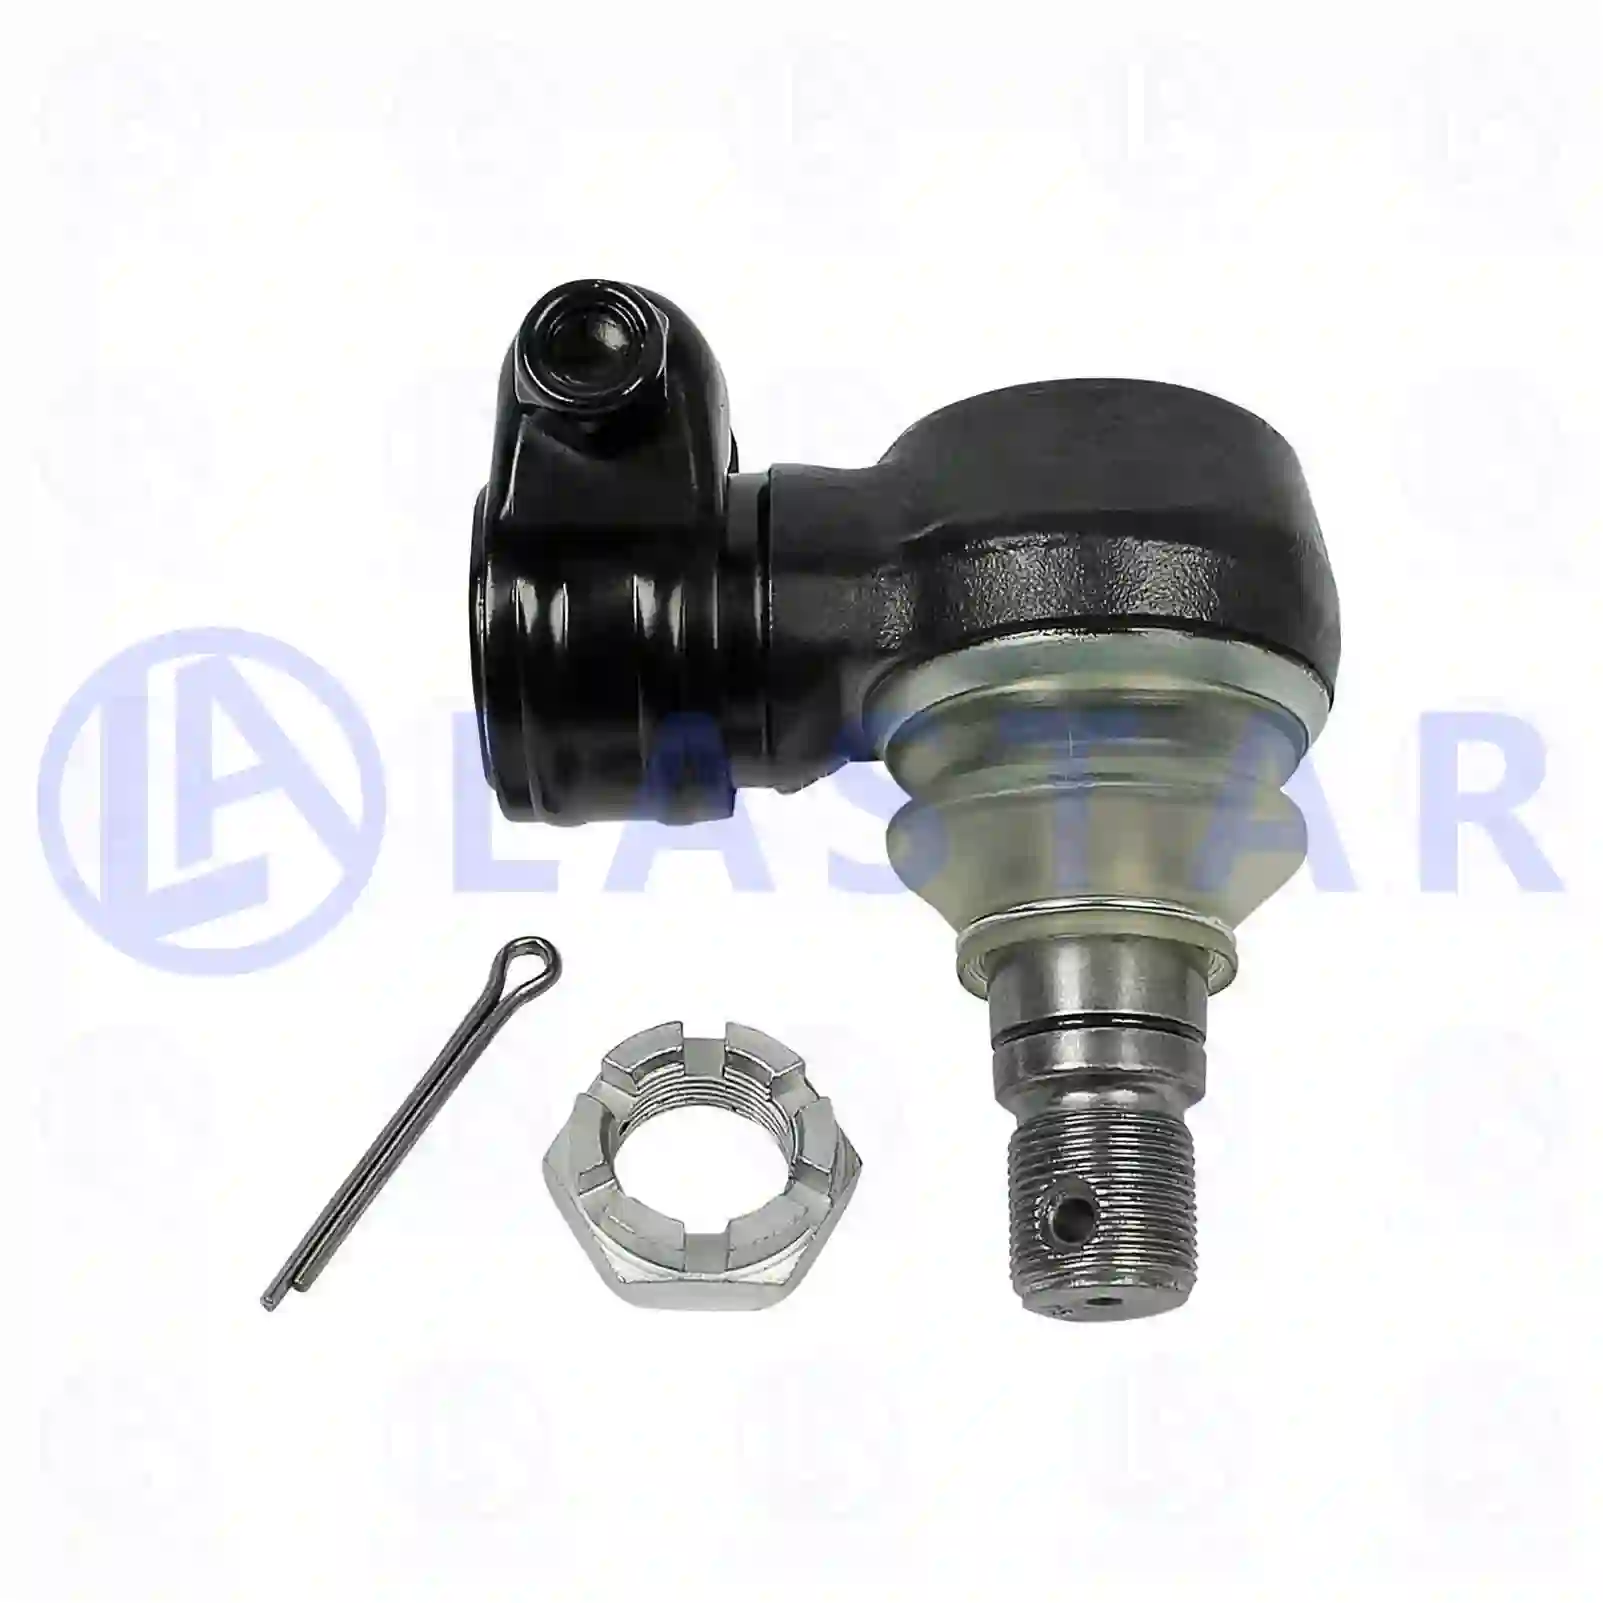 Ball joint, right hand thread, 77730382, 55175540, 93192809, 81953016238, 82953016015, 0024601448, 011019869, 012216380, 281953016238, 46181340, 55175540 ||  77730382 Lastar Spare Part | Truck Spare Parts, Auotomotive Spare Parts Ball joint, right hand thread, 77730382, 55175540, 93192809, 81953016238, 82953016015, 0024601448, 011019869, 012216380, 281953016238, 46181340, 55175540 ||  77730382 Lastar Spare Part | Truck Spare Parts, Auotomotive Spare Parts